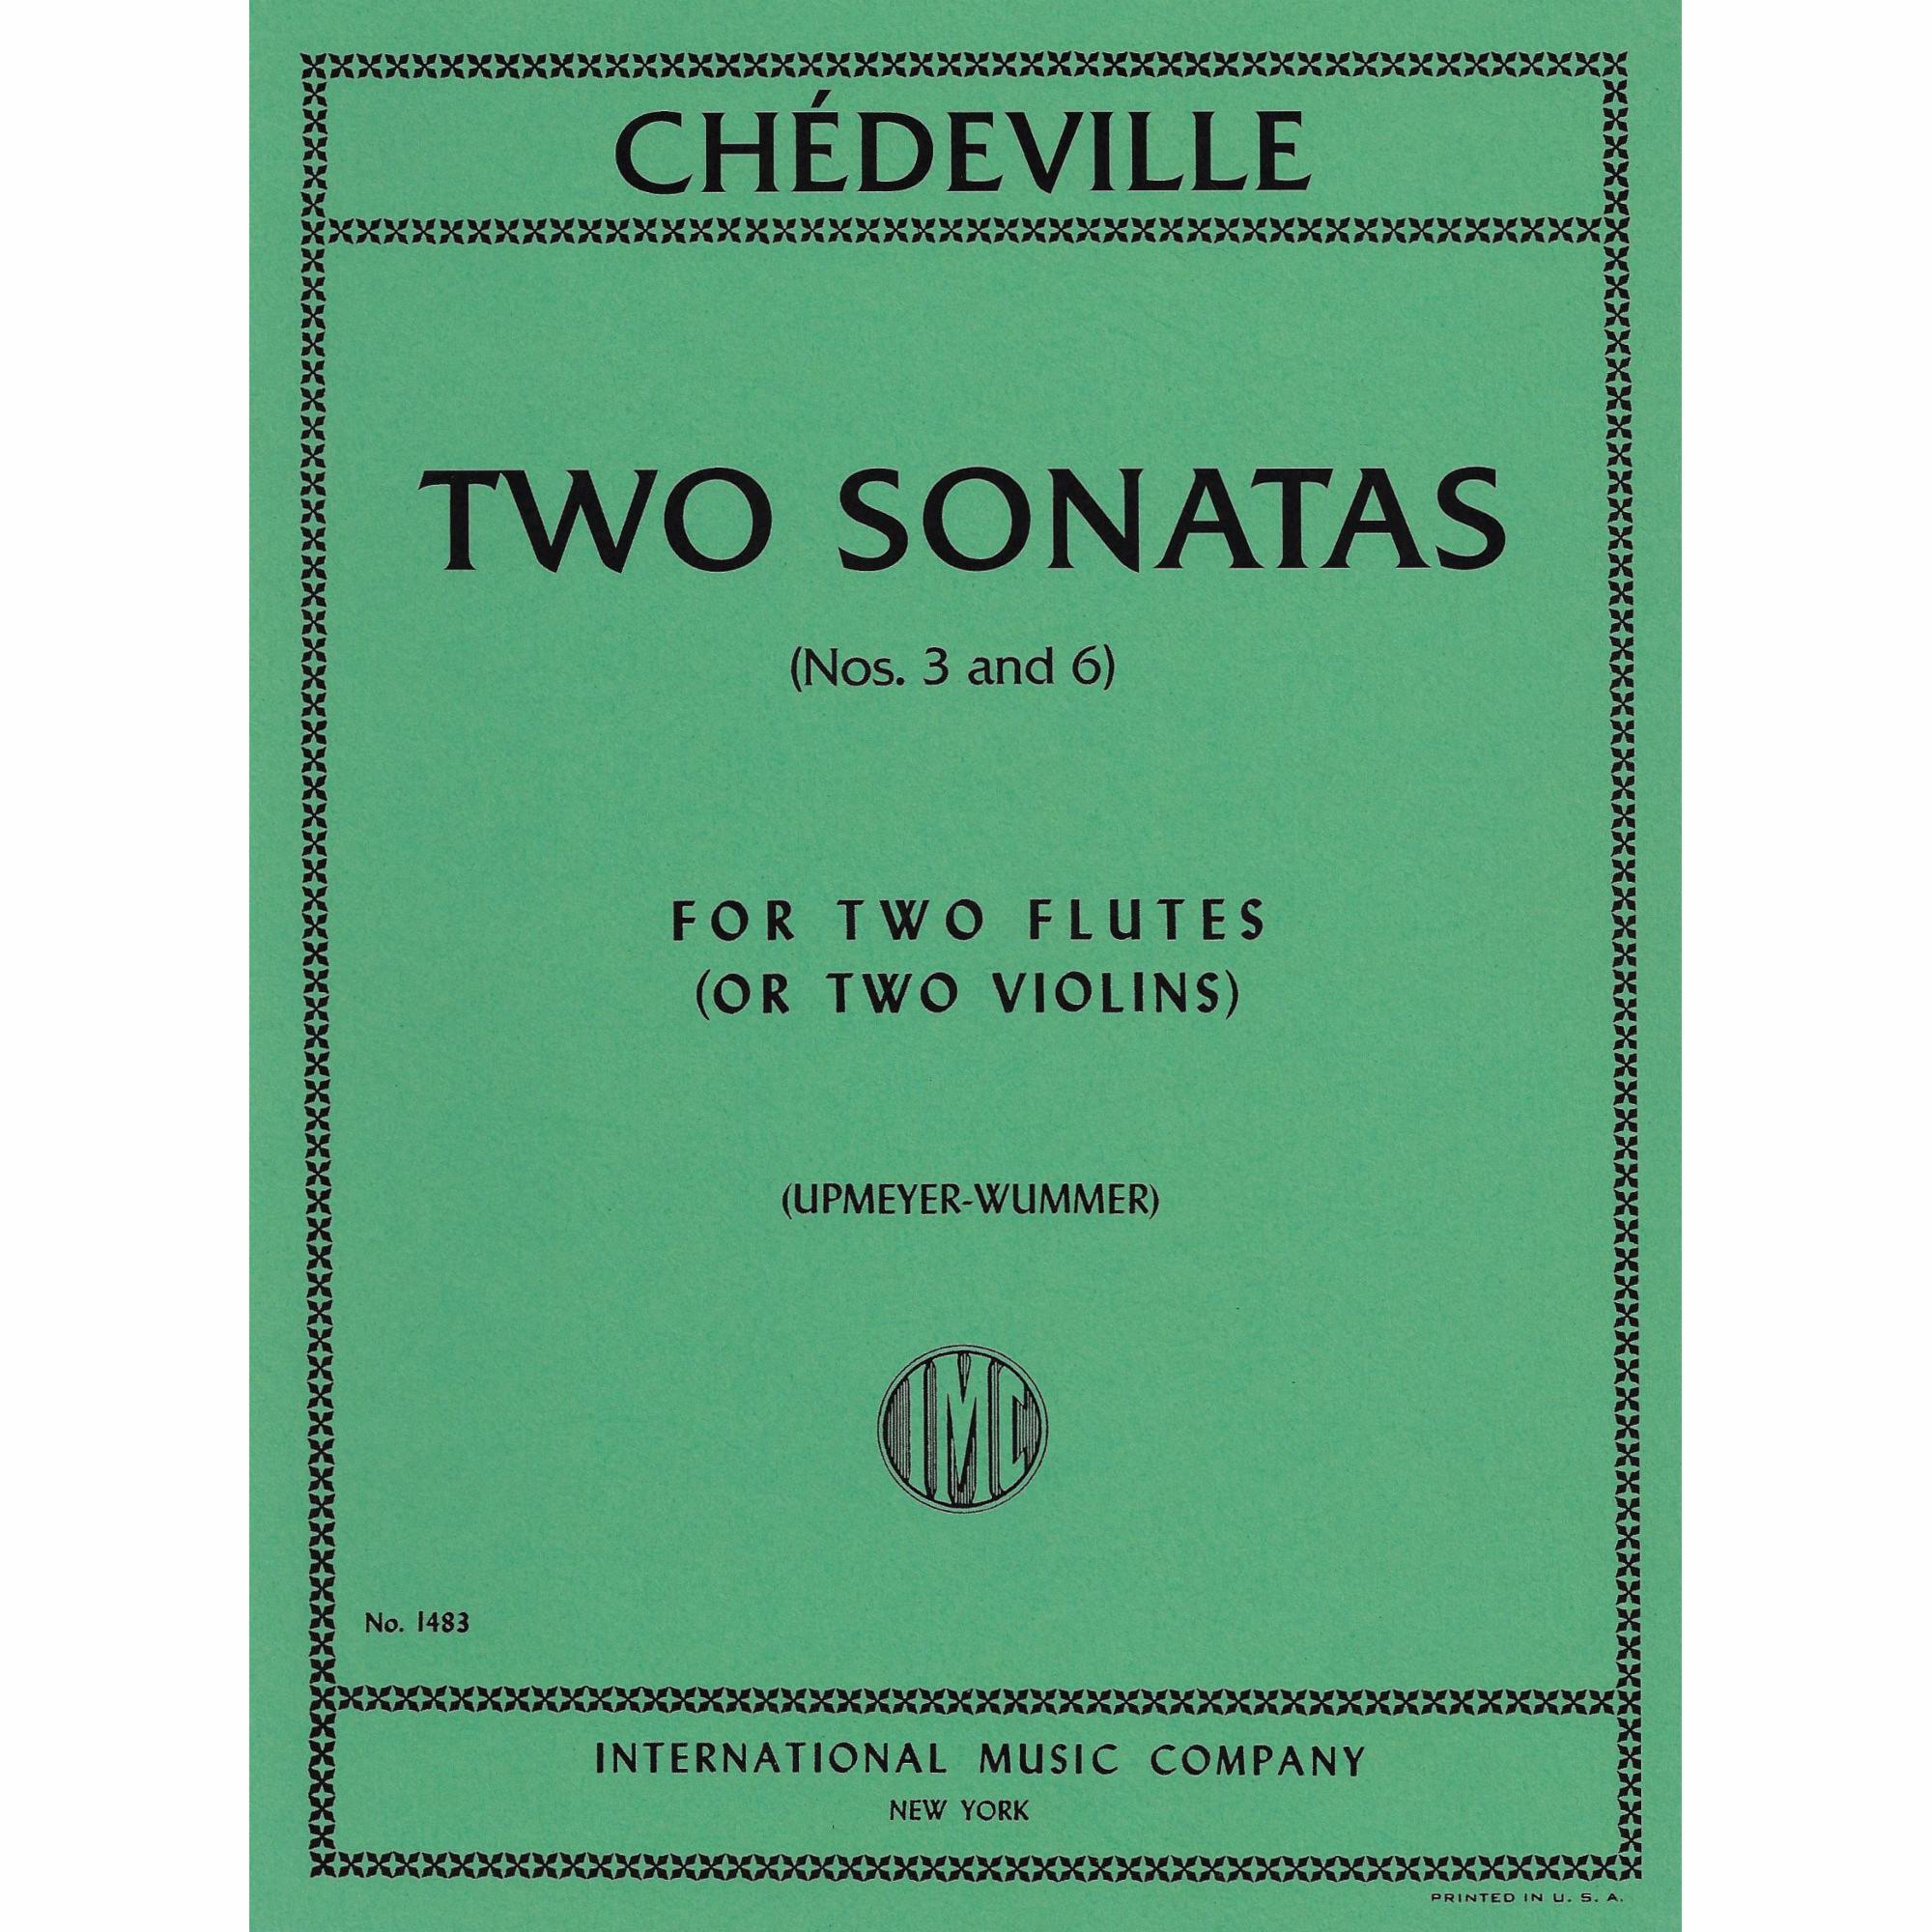 Chedeville -- Two Sonatas (Nos. 3 & 6) for Two Violins